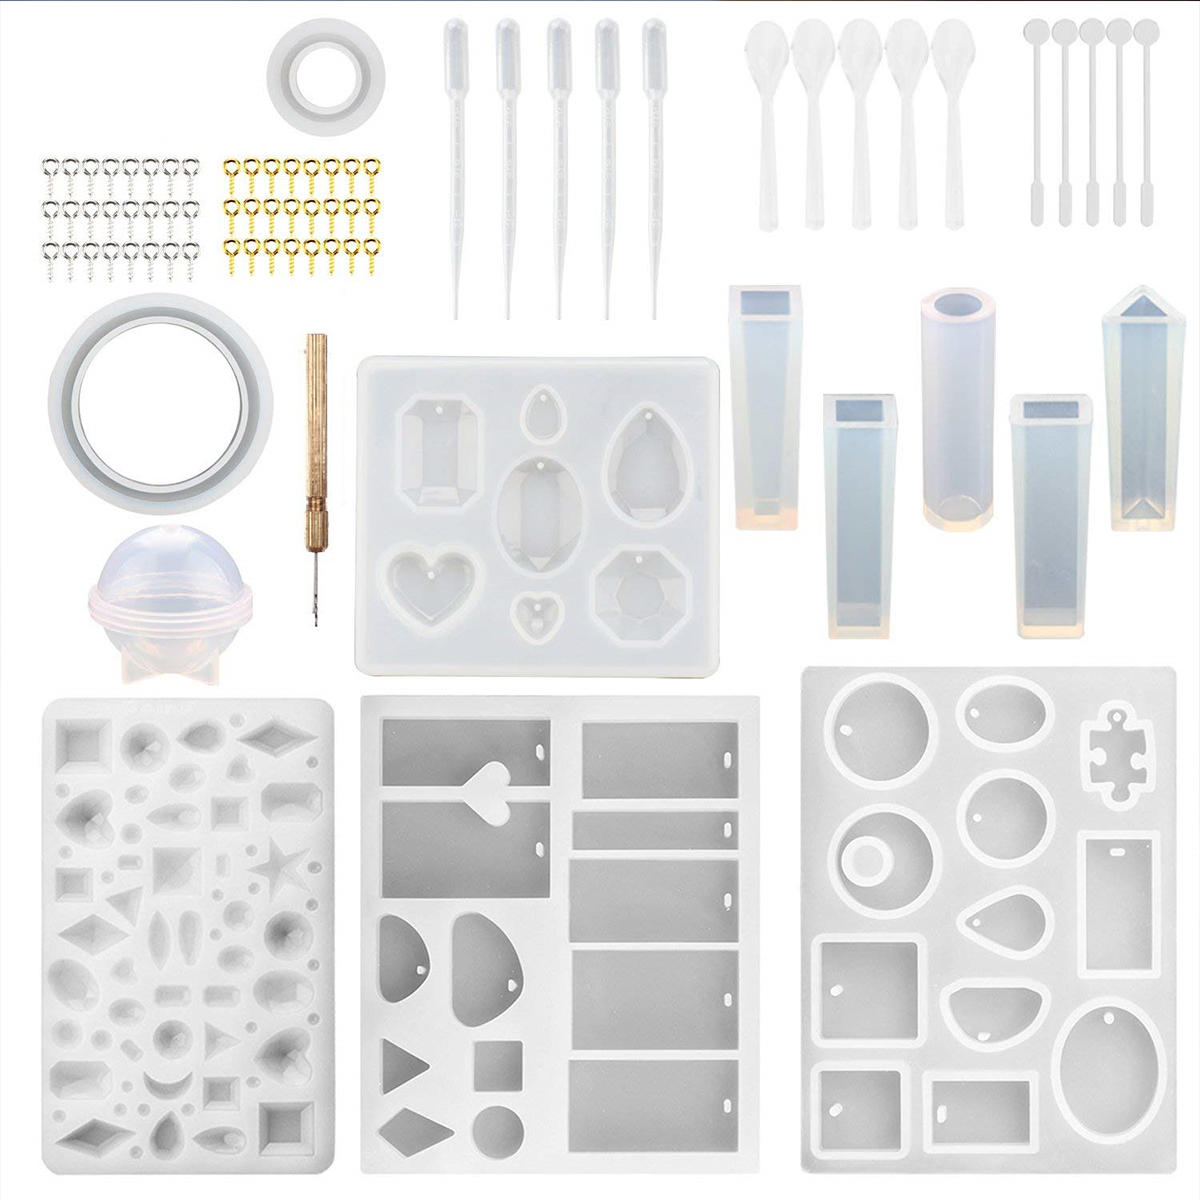 

76PCS DIY Resin Casting Molds Silicone Craft Jewelry Pendant Making Mould Tools Kit